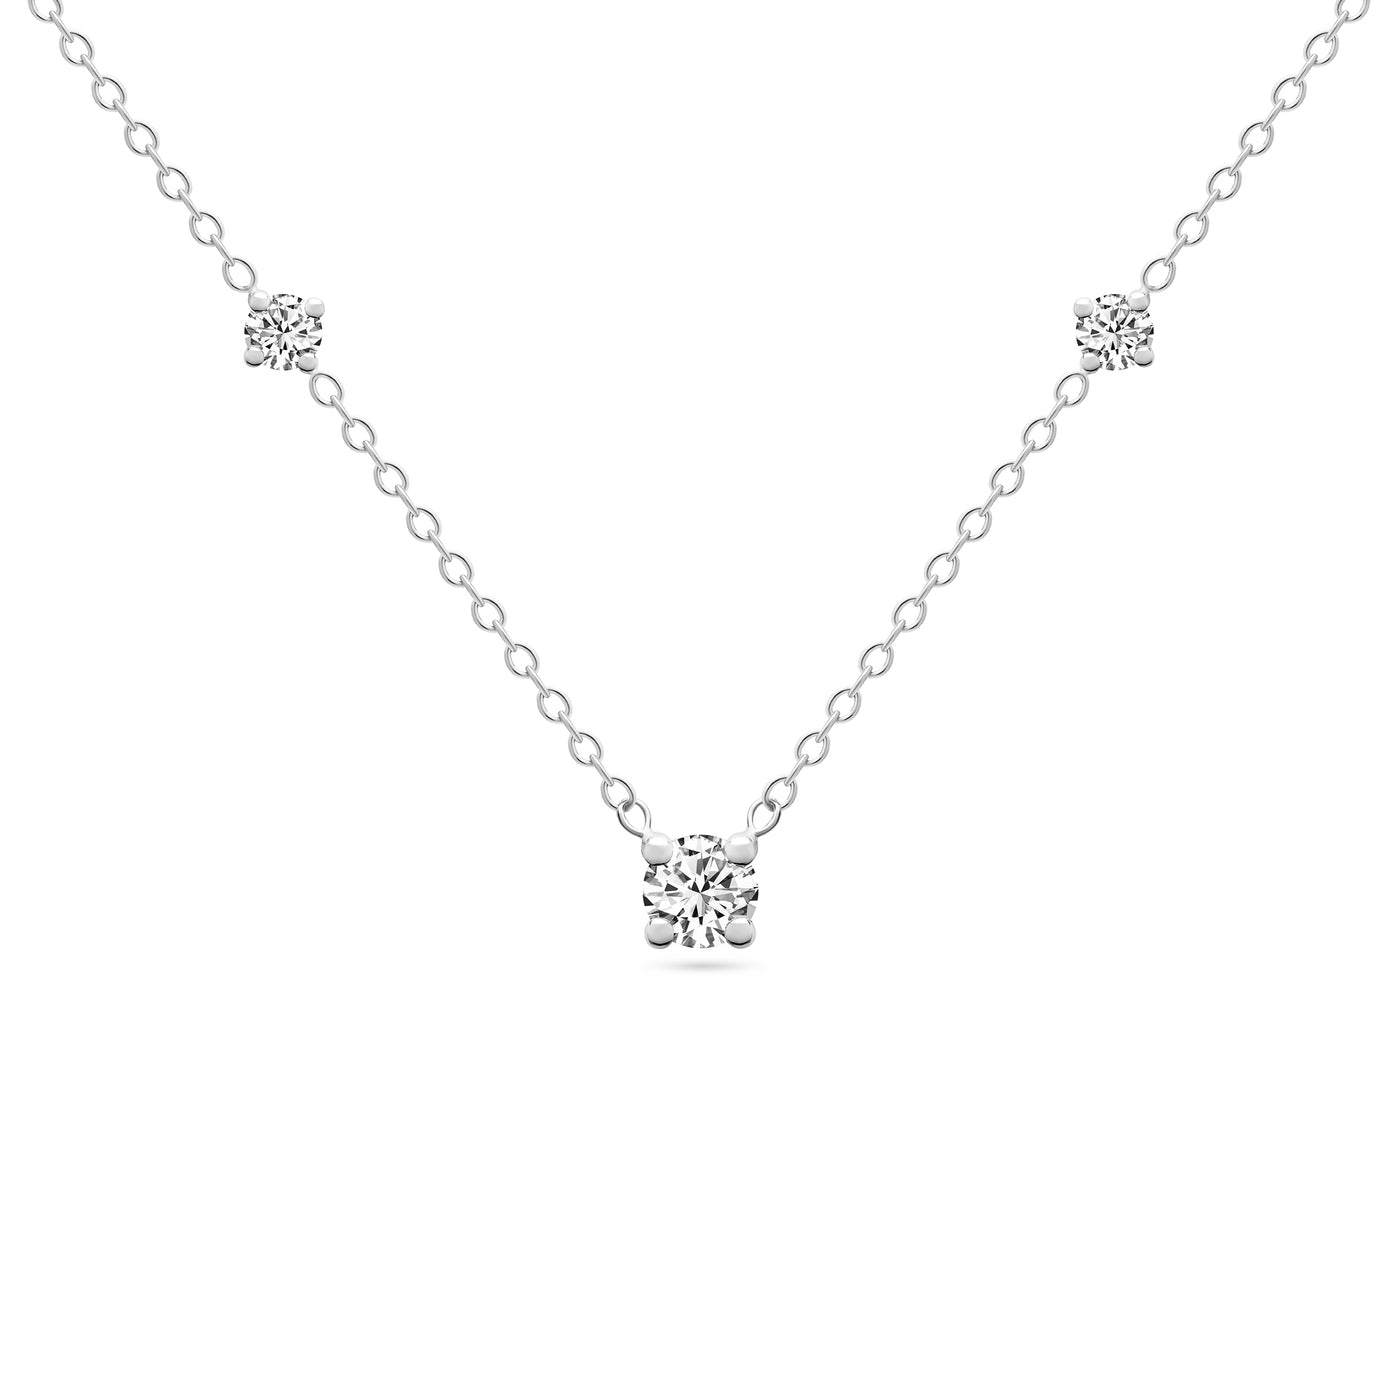 14K Solid Gold Prong Set Diamond Solitaire Station Necklace